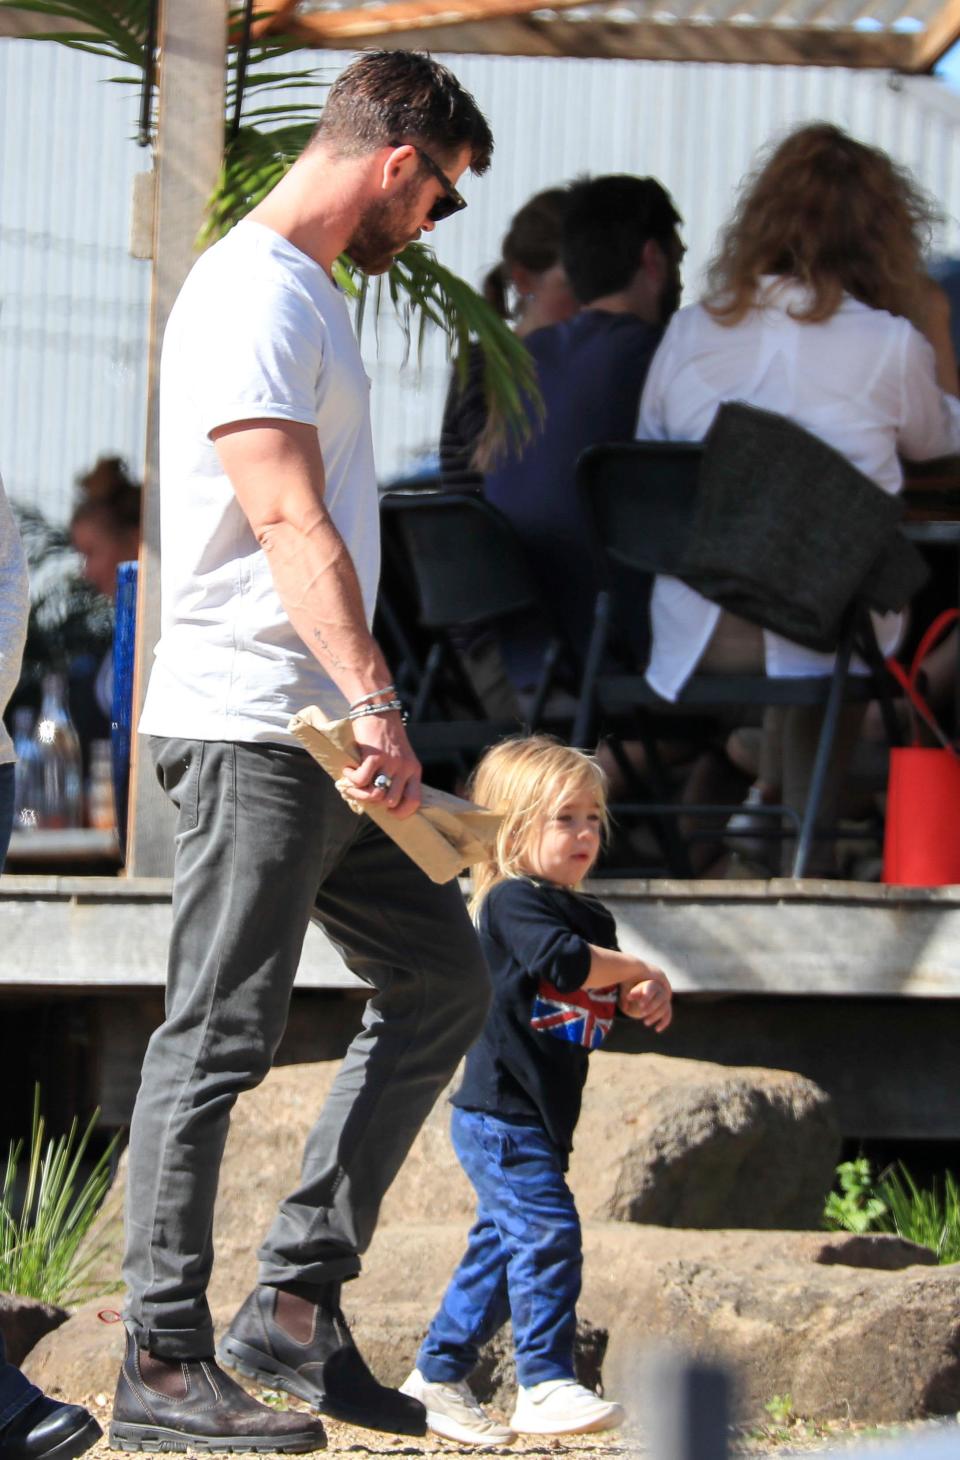 Chris and Elsa enjoy family day out with their twin boys